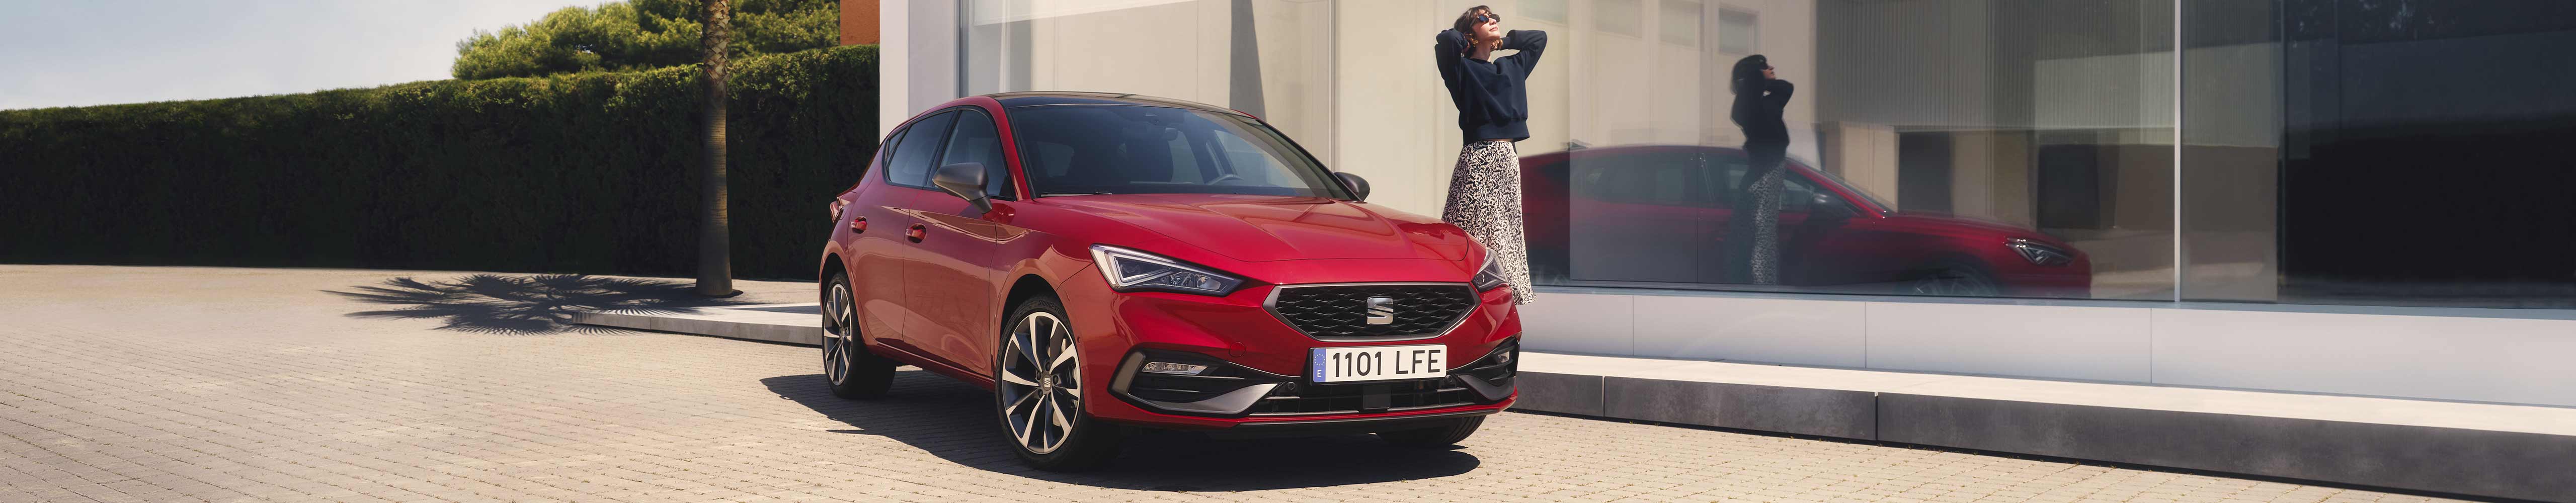 Woman standing next to SEAT Leon desire red colour